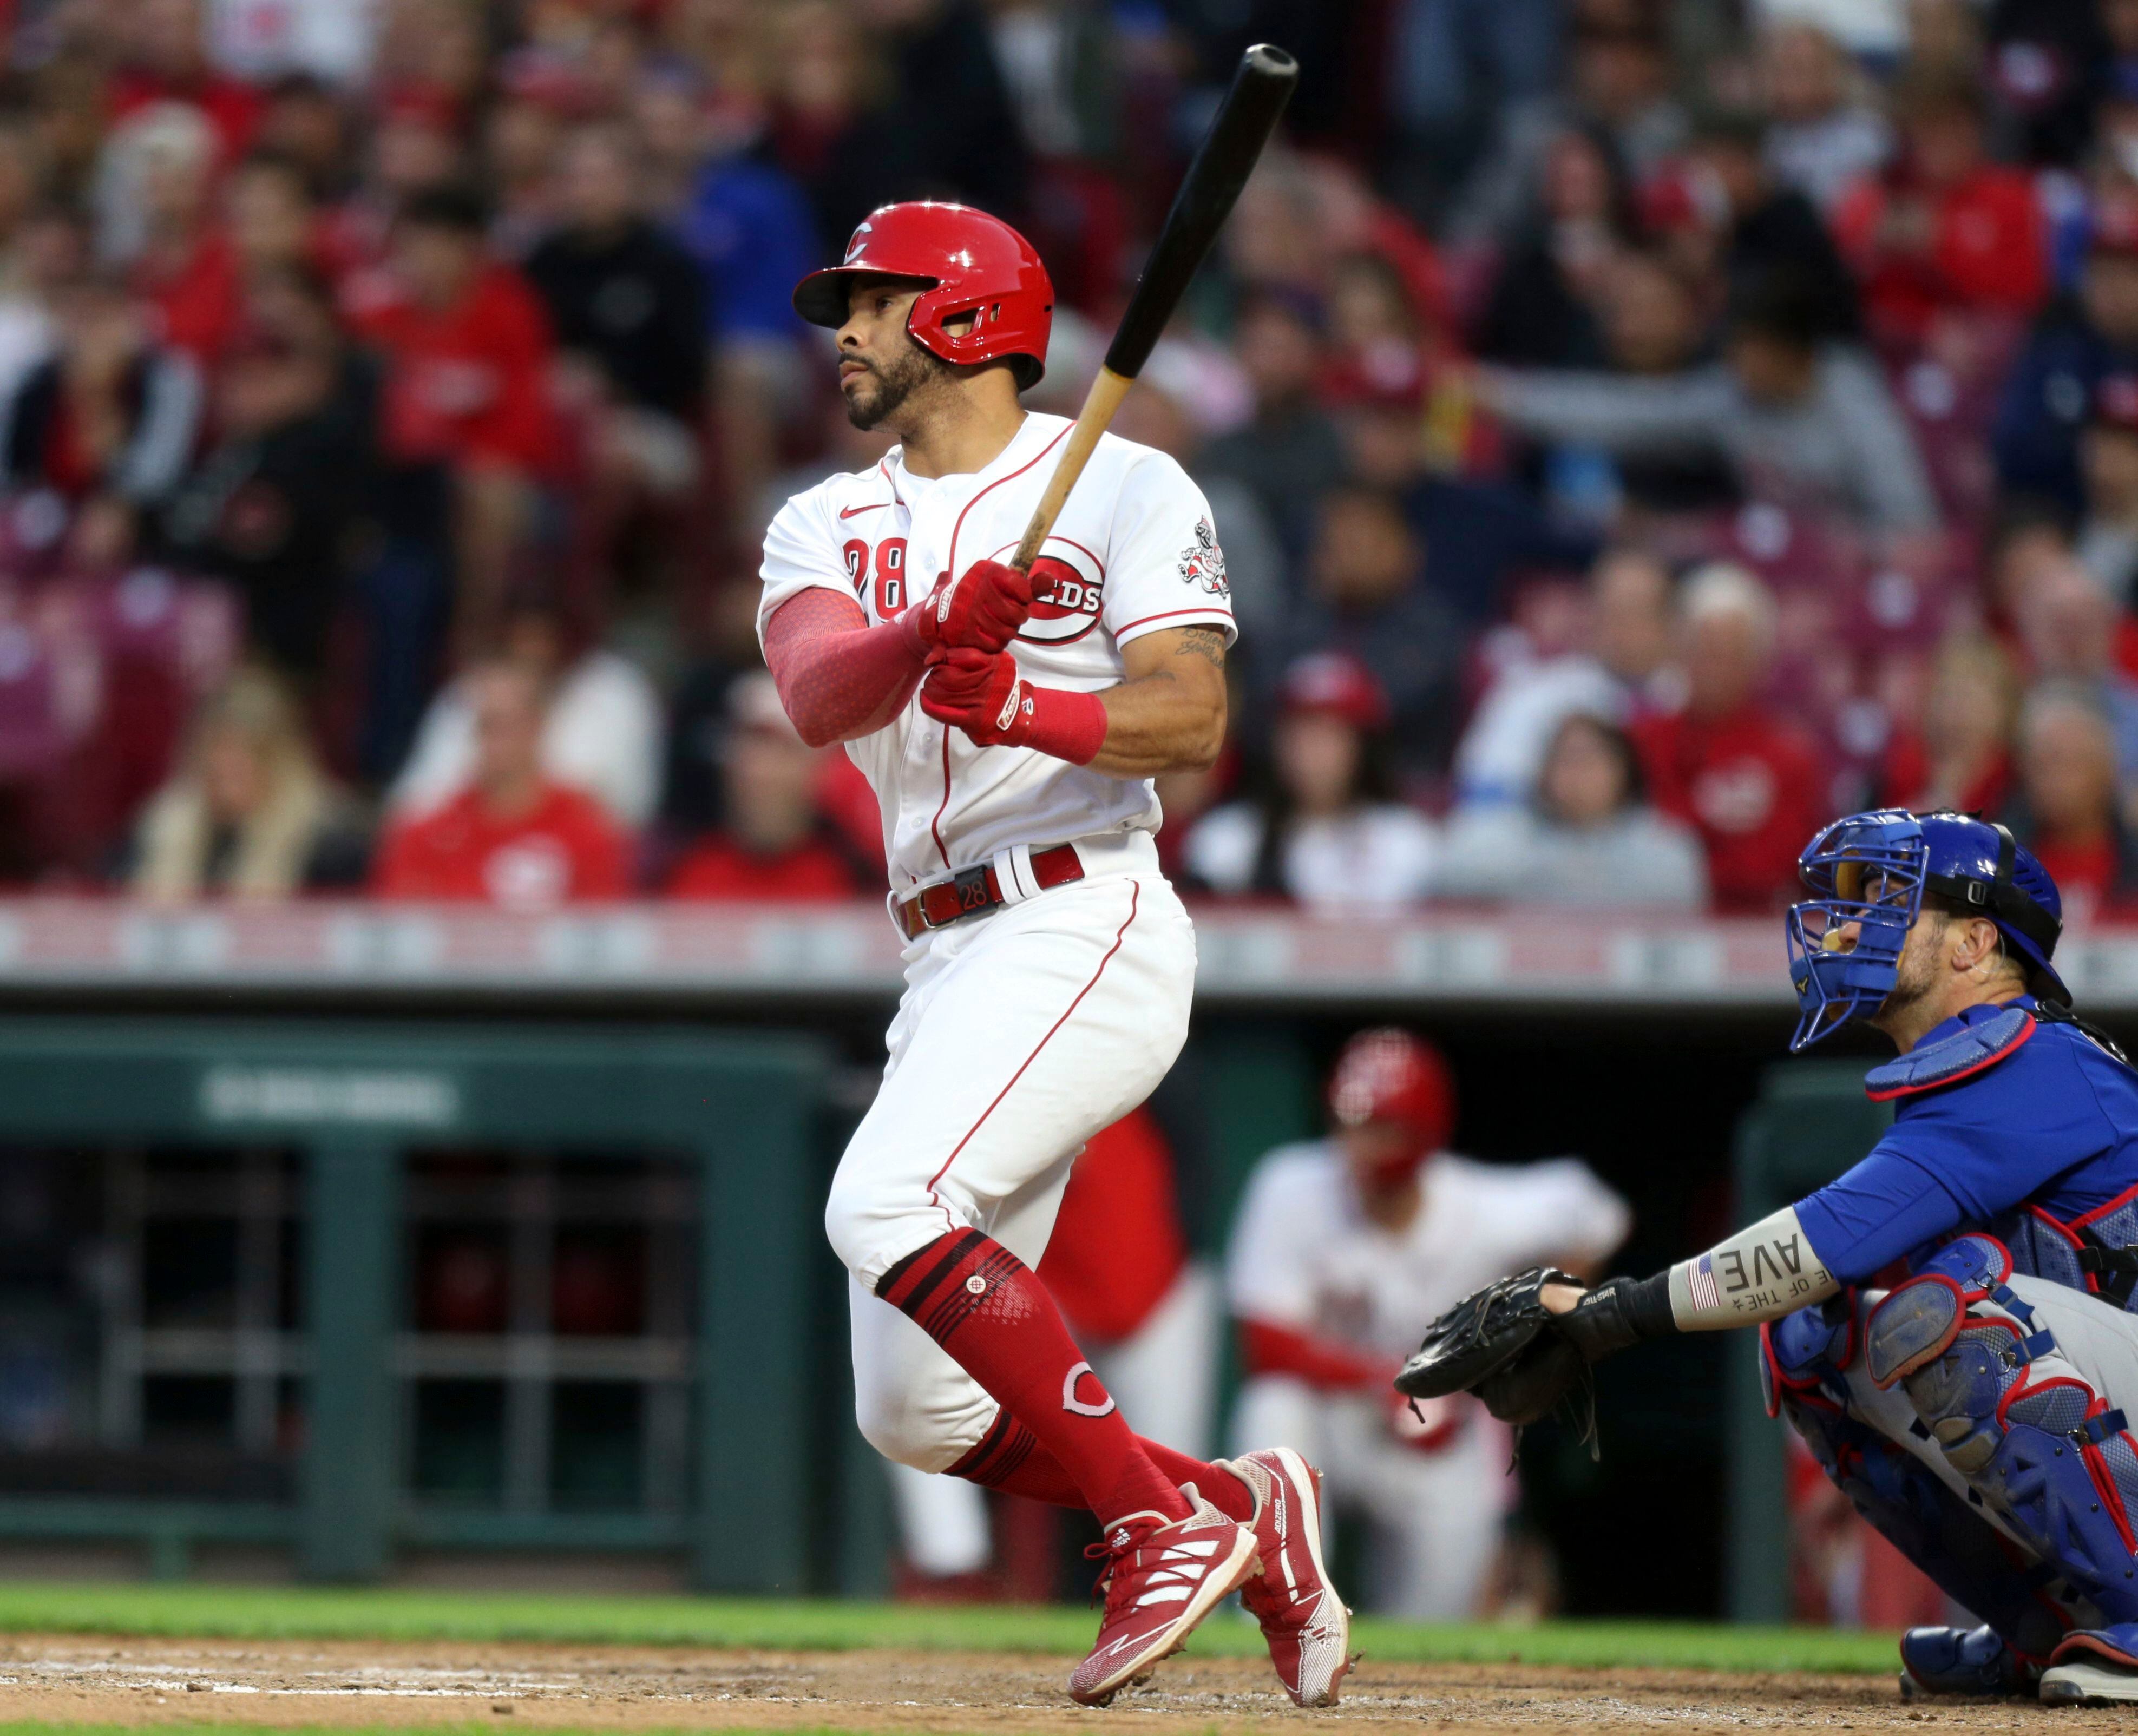 Reds' Tommy Pham suspended 3 games for slapping Giants' Joc